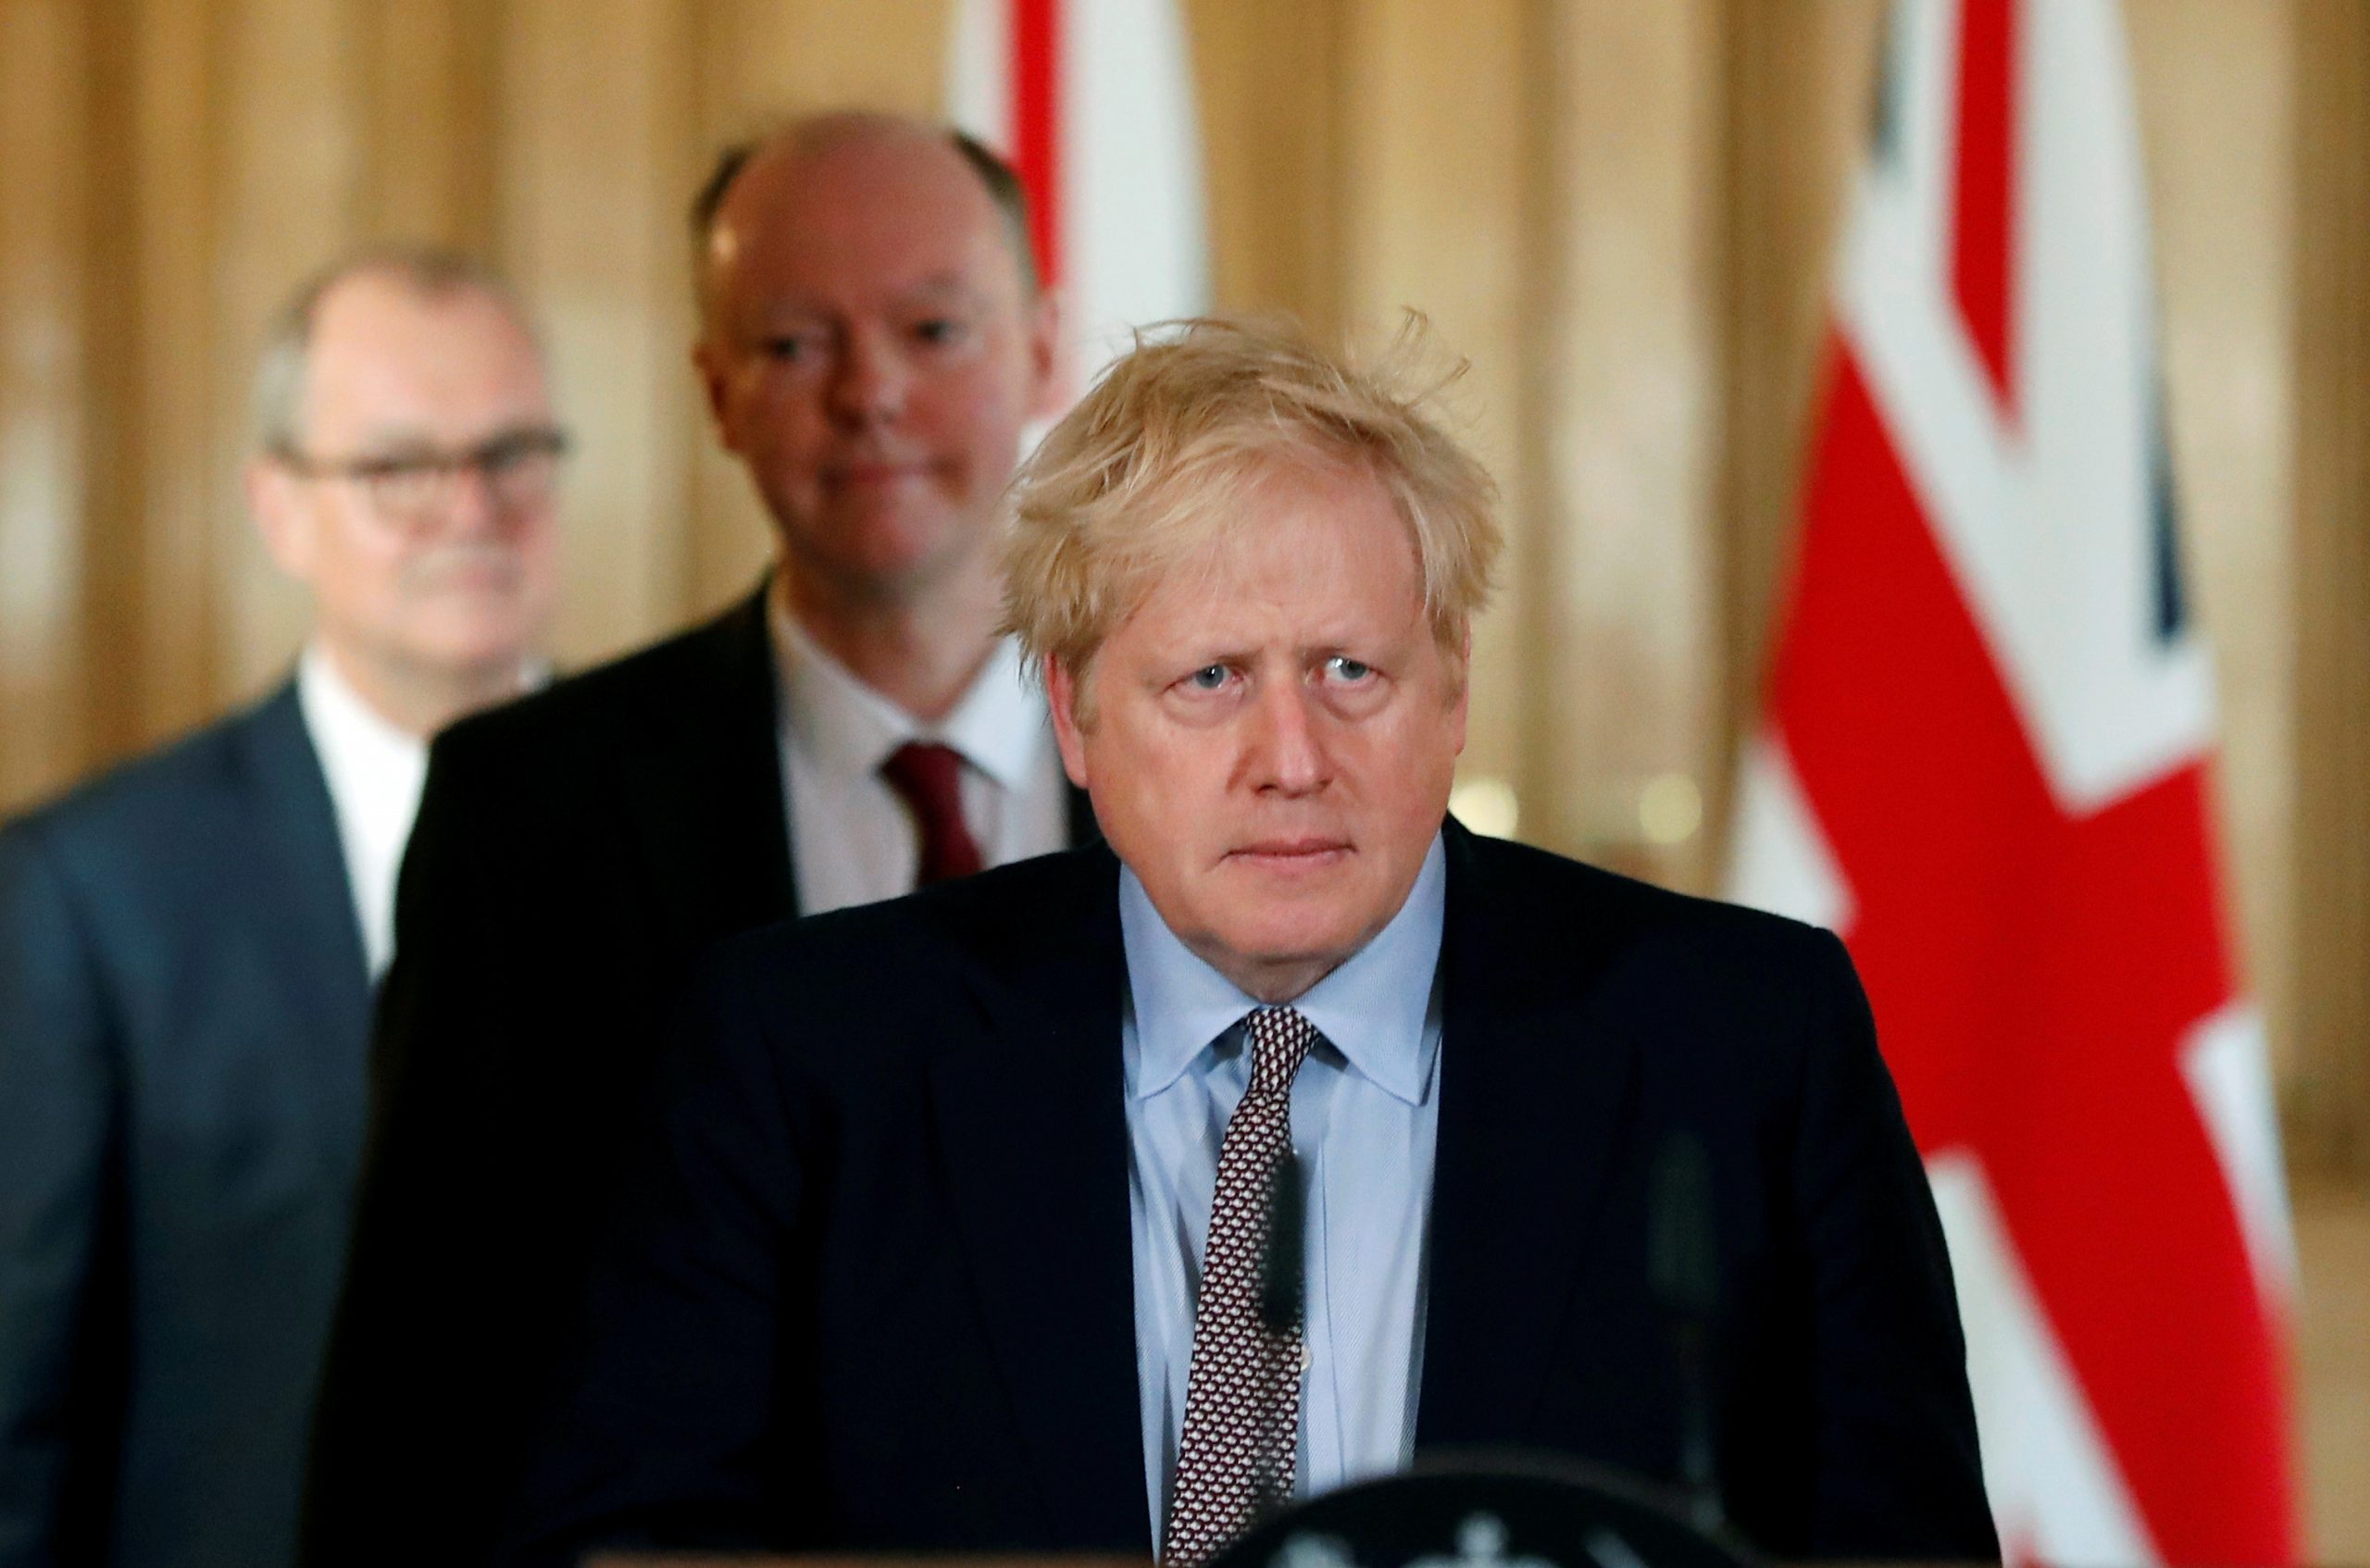 FILE PHOTO: Britain's Prime Minister Boris Johnson attends a news conference on the novel coronavirus, in London FILE PHOTO: Britain's Prime Minister Boris Johnson, Chris Whitty, Chief Medical Officer for England and Chief Scientific Adviser to the Government, Sir Patrick Vallance, arrive for a news conference on the novel coronavirus, in London, Britain March 3, 2020.   To match Special Report HEALTH-CORONAVIRUS/BRITAIN-PATH  Frank Augstein/Pool via REUTERS/File Photo POOL New